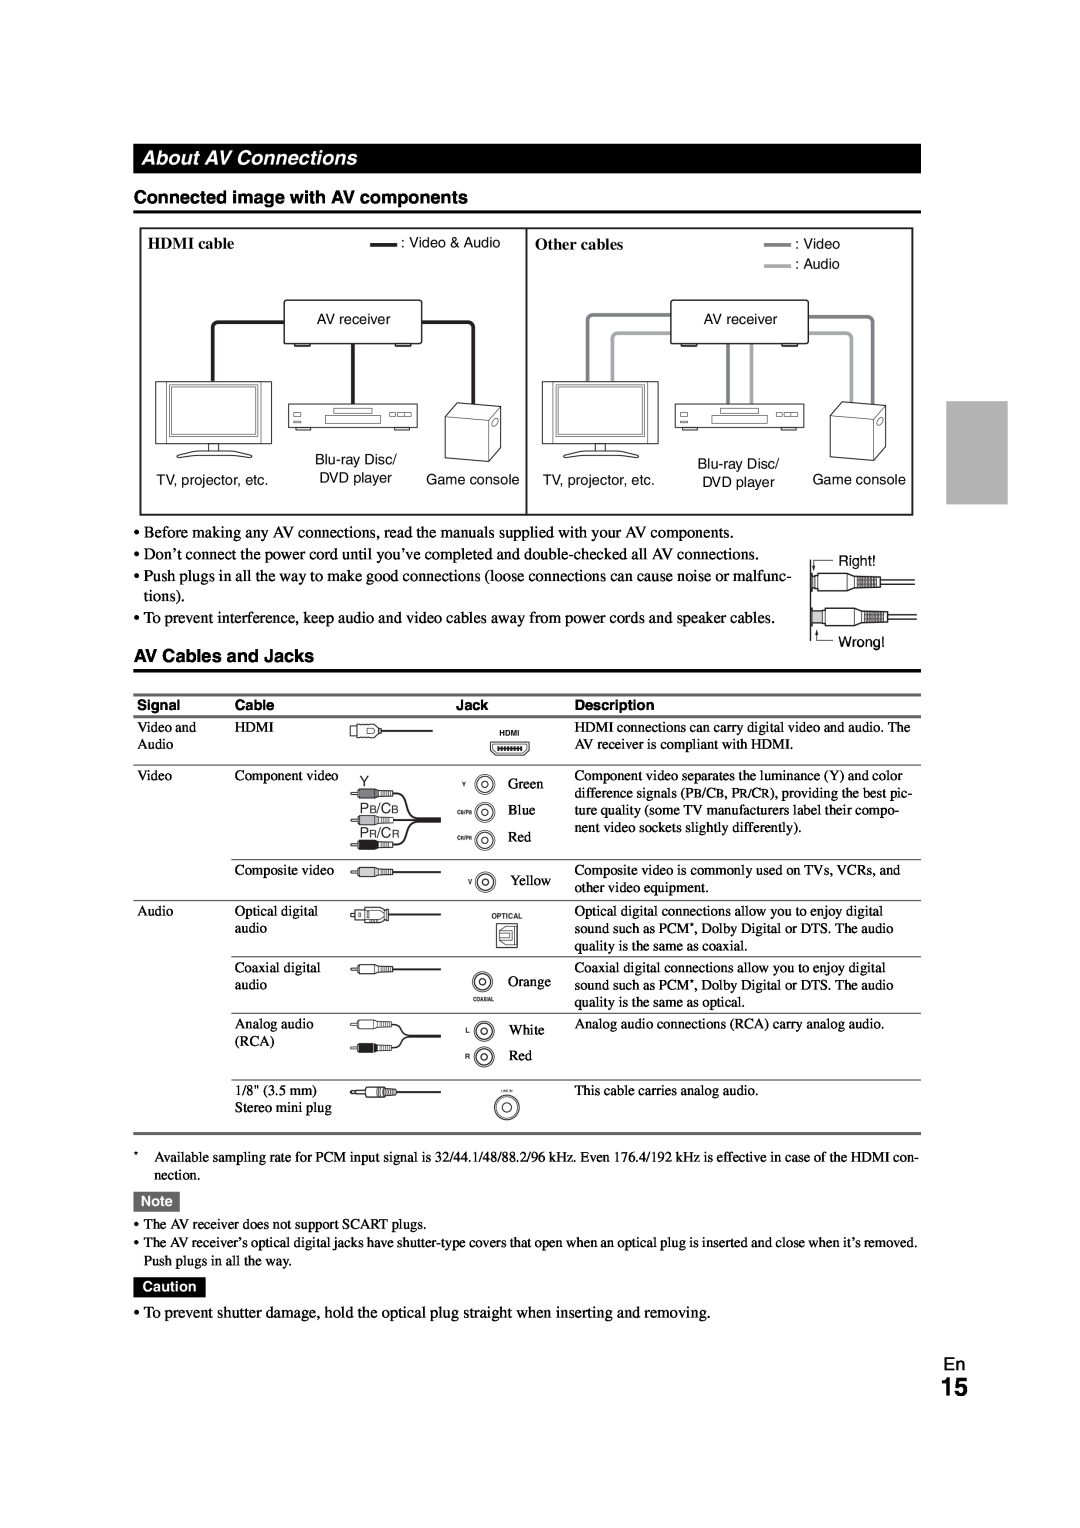 Onkyo AVX-280 instruction manual About AV Connections, Connected image with AV components, AV Cables and Jacks 